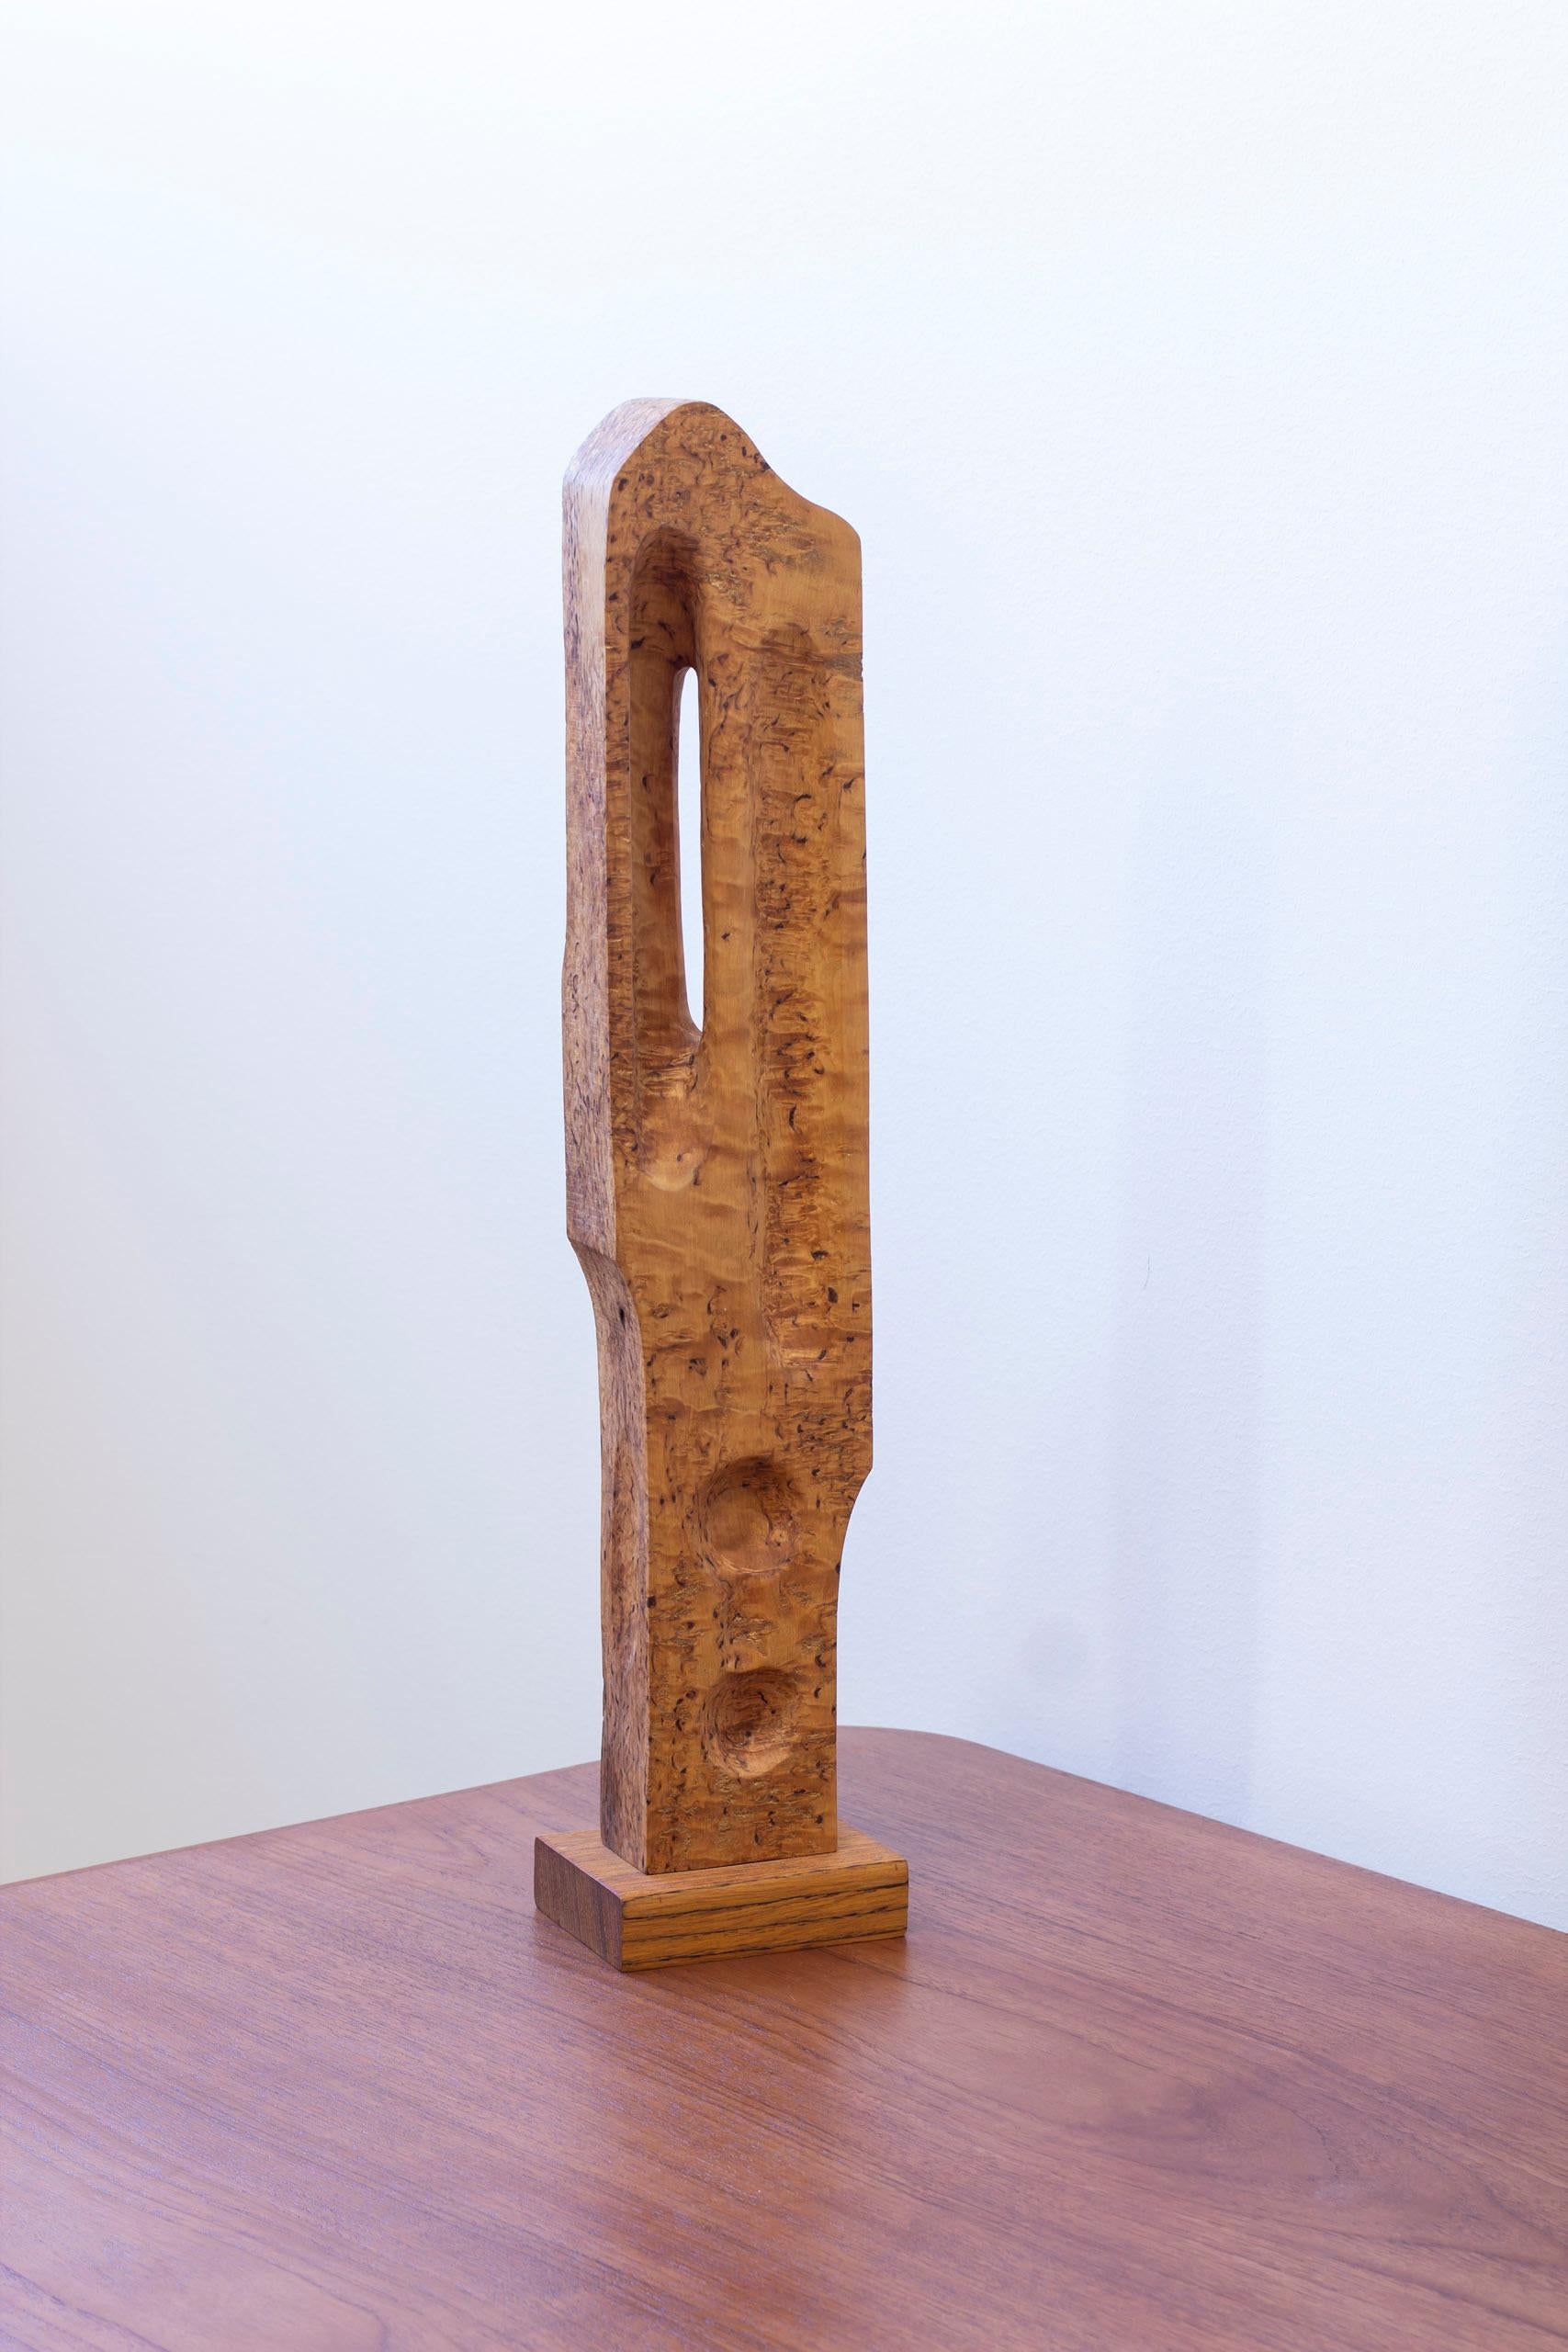 Abstract wooden sculpture by Swedish artist Sven Olsson. Hand made from burl birch, ca 1960-70s. Beautifully crafted with subtle details. Very good vintage condition with light age related patina and wear.

 

Artist: Sven Olsson

Year: